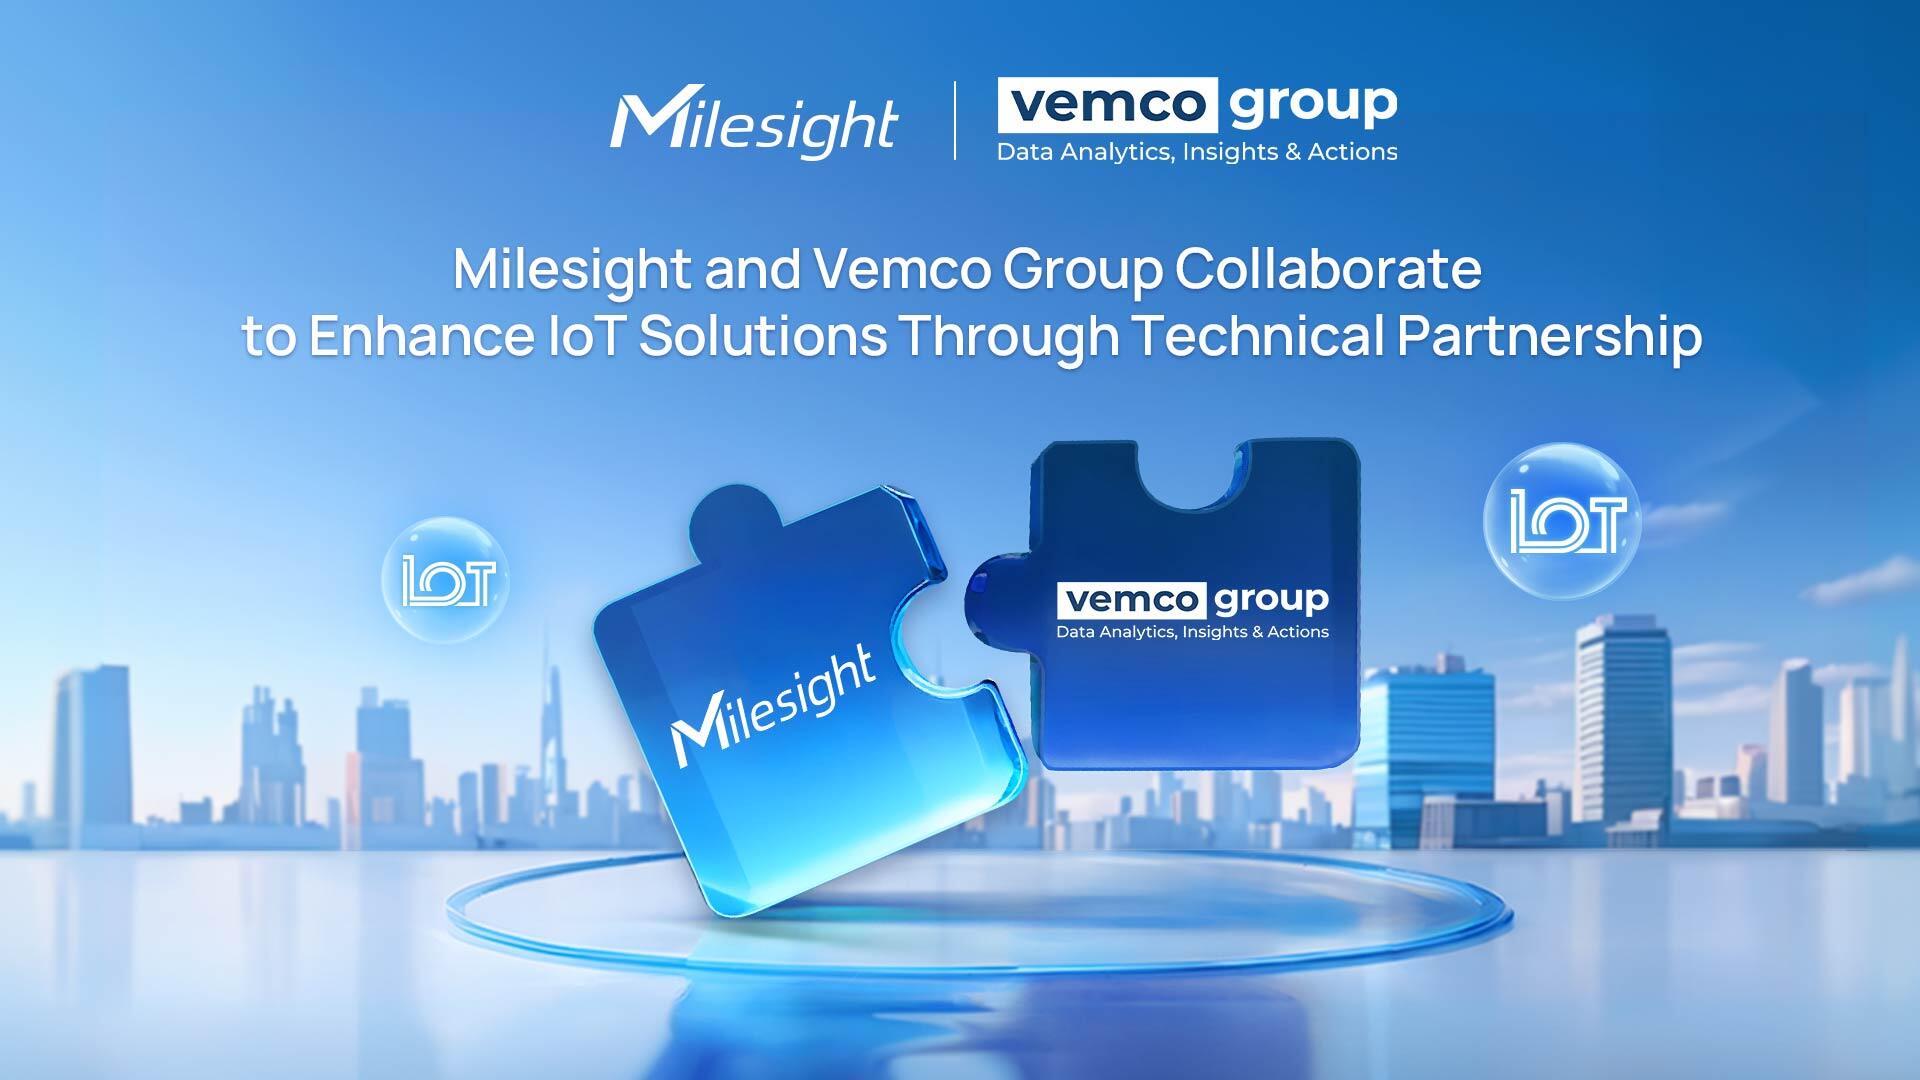  Vemco Group and Milesight Partner to Elevate IoT Solutions